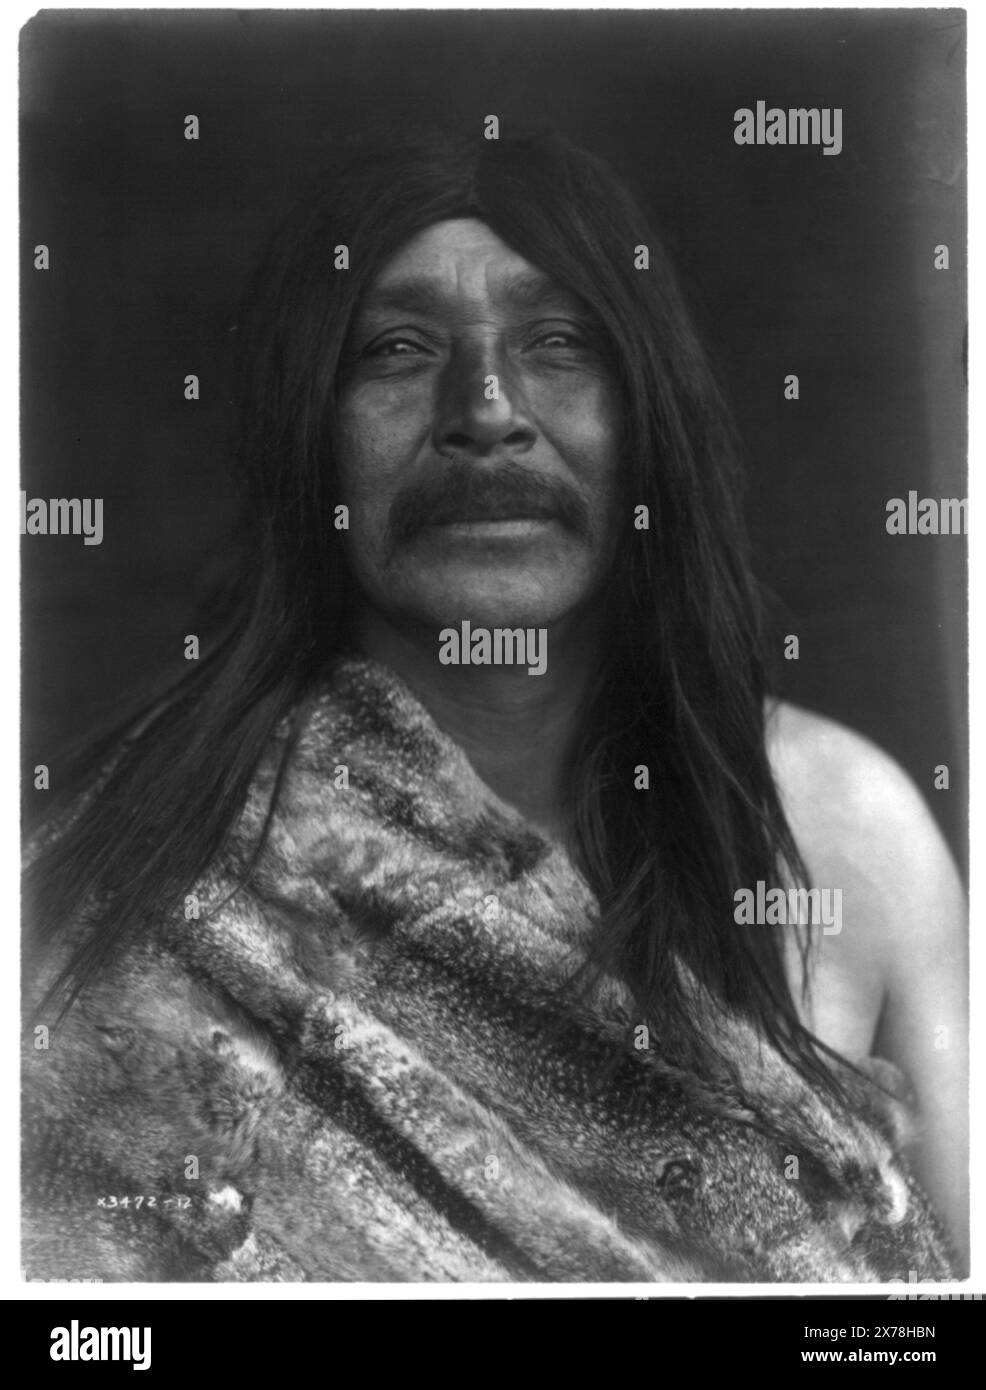 Lelehalt Quilcene, Curtis no. 3472-12., Forms part of: Edward S. Curtis Collection ., Published in: The North American Indian / Edward S. Curtis. [Seattle, Wash.] : Edward S. Curtis, 1907-30, Suppl. v. 9, pl. 304.. Lelehalt. , Indians of North America, 1910-1920. , Twana Indians, 1910-1920. , Hair, 1910-1920. Stock Photo